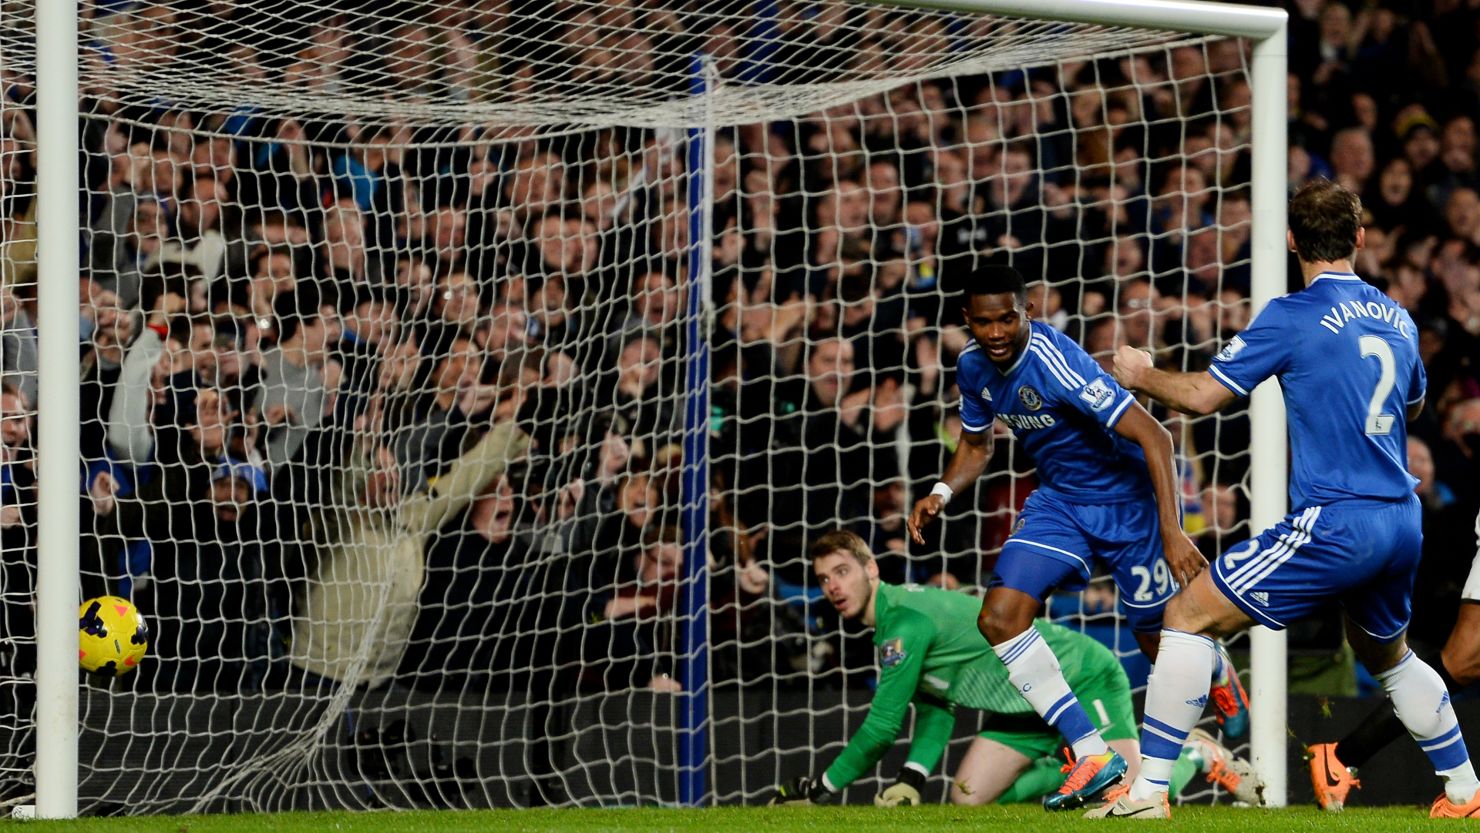 Samuel Eto'o (center) celebrates with Branislav Ivanovic after completing his hat trick for Chelsea against Manchester United